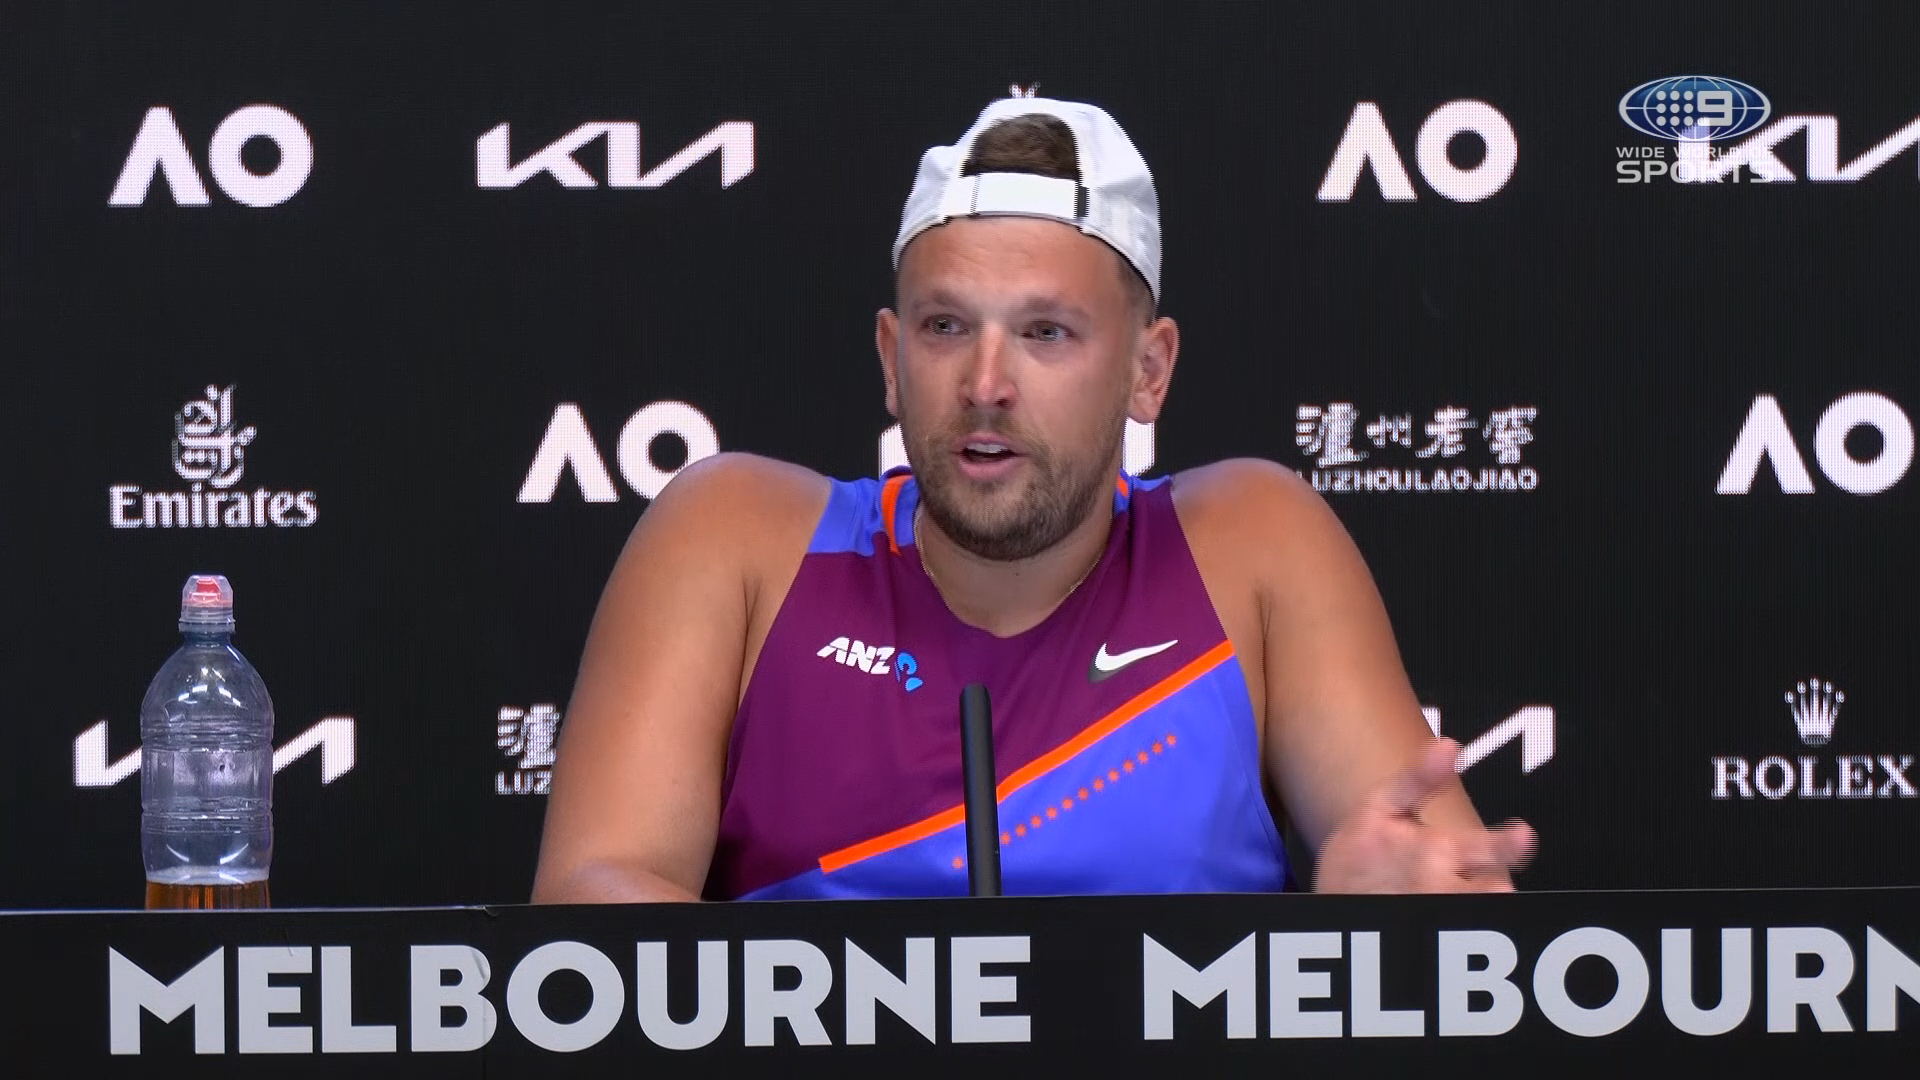 The mid-press conference message that triggered tears from Dylan Alcott